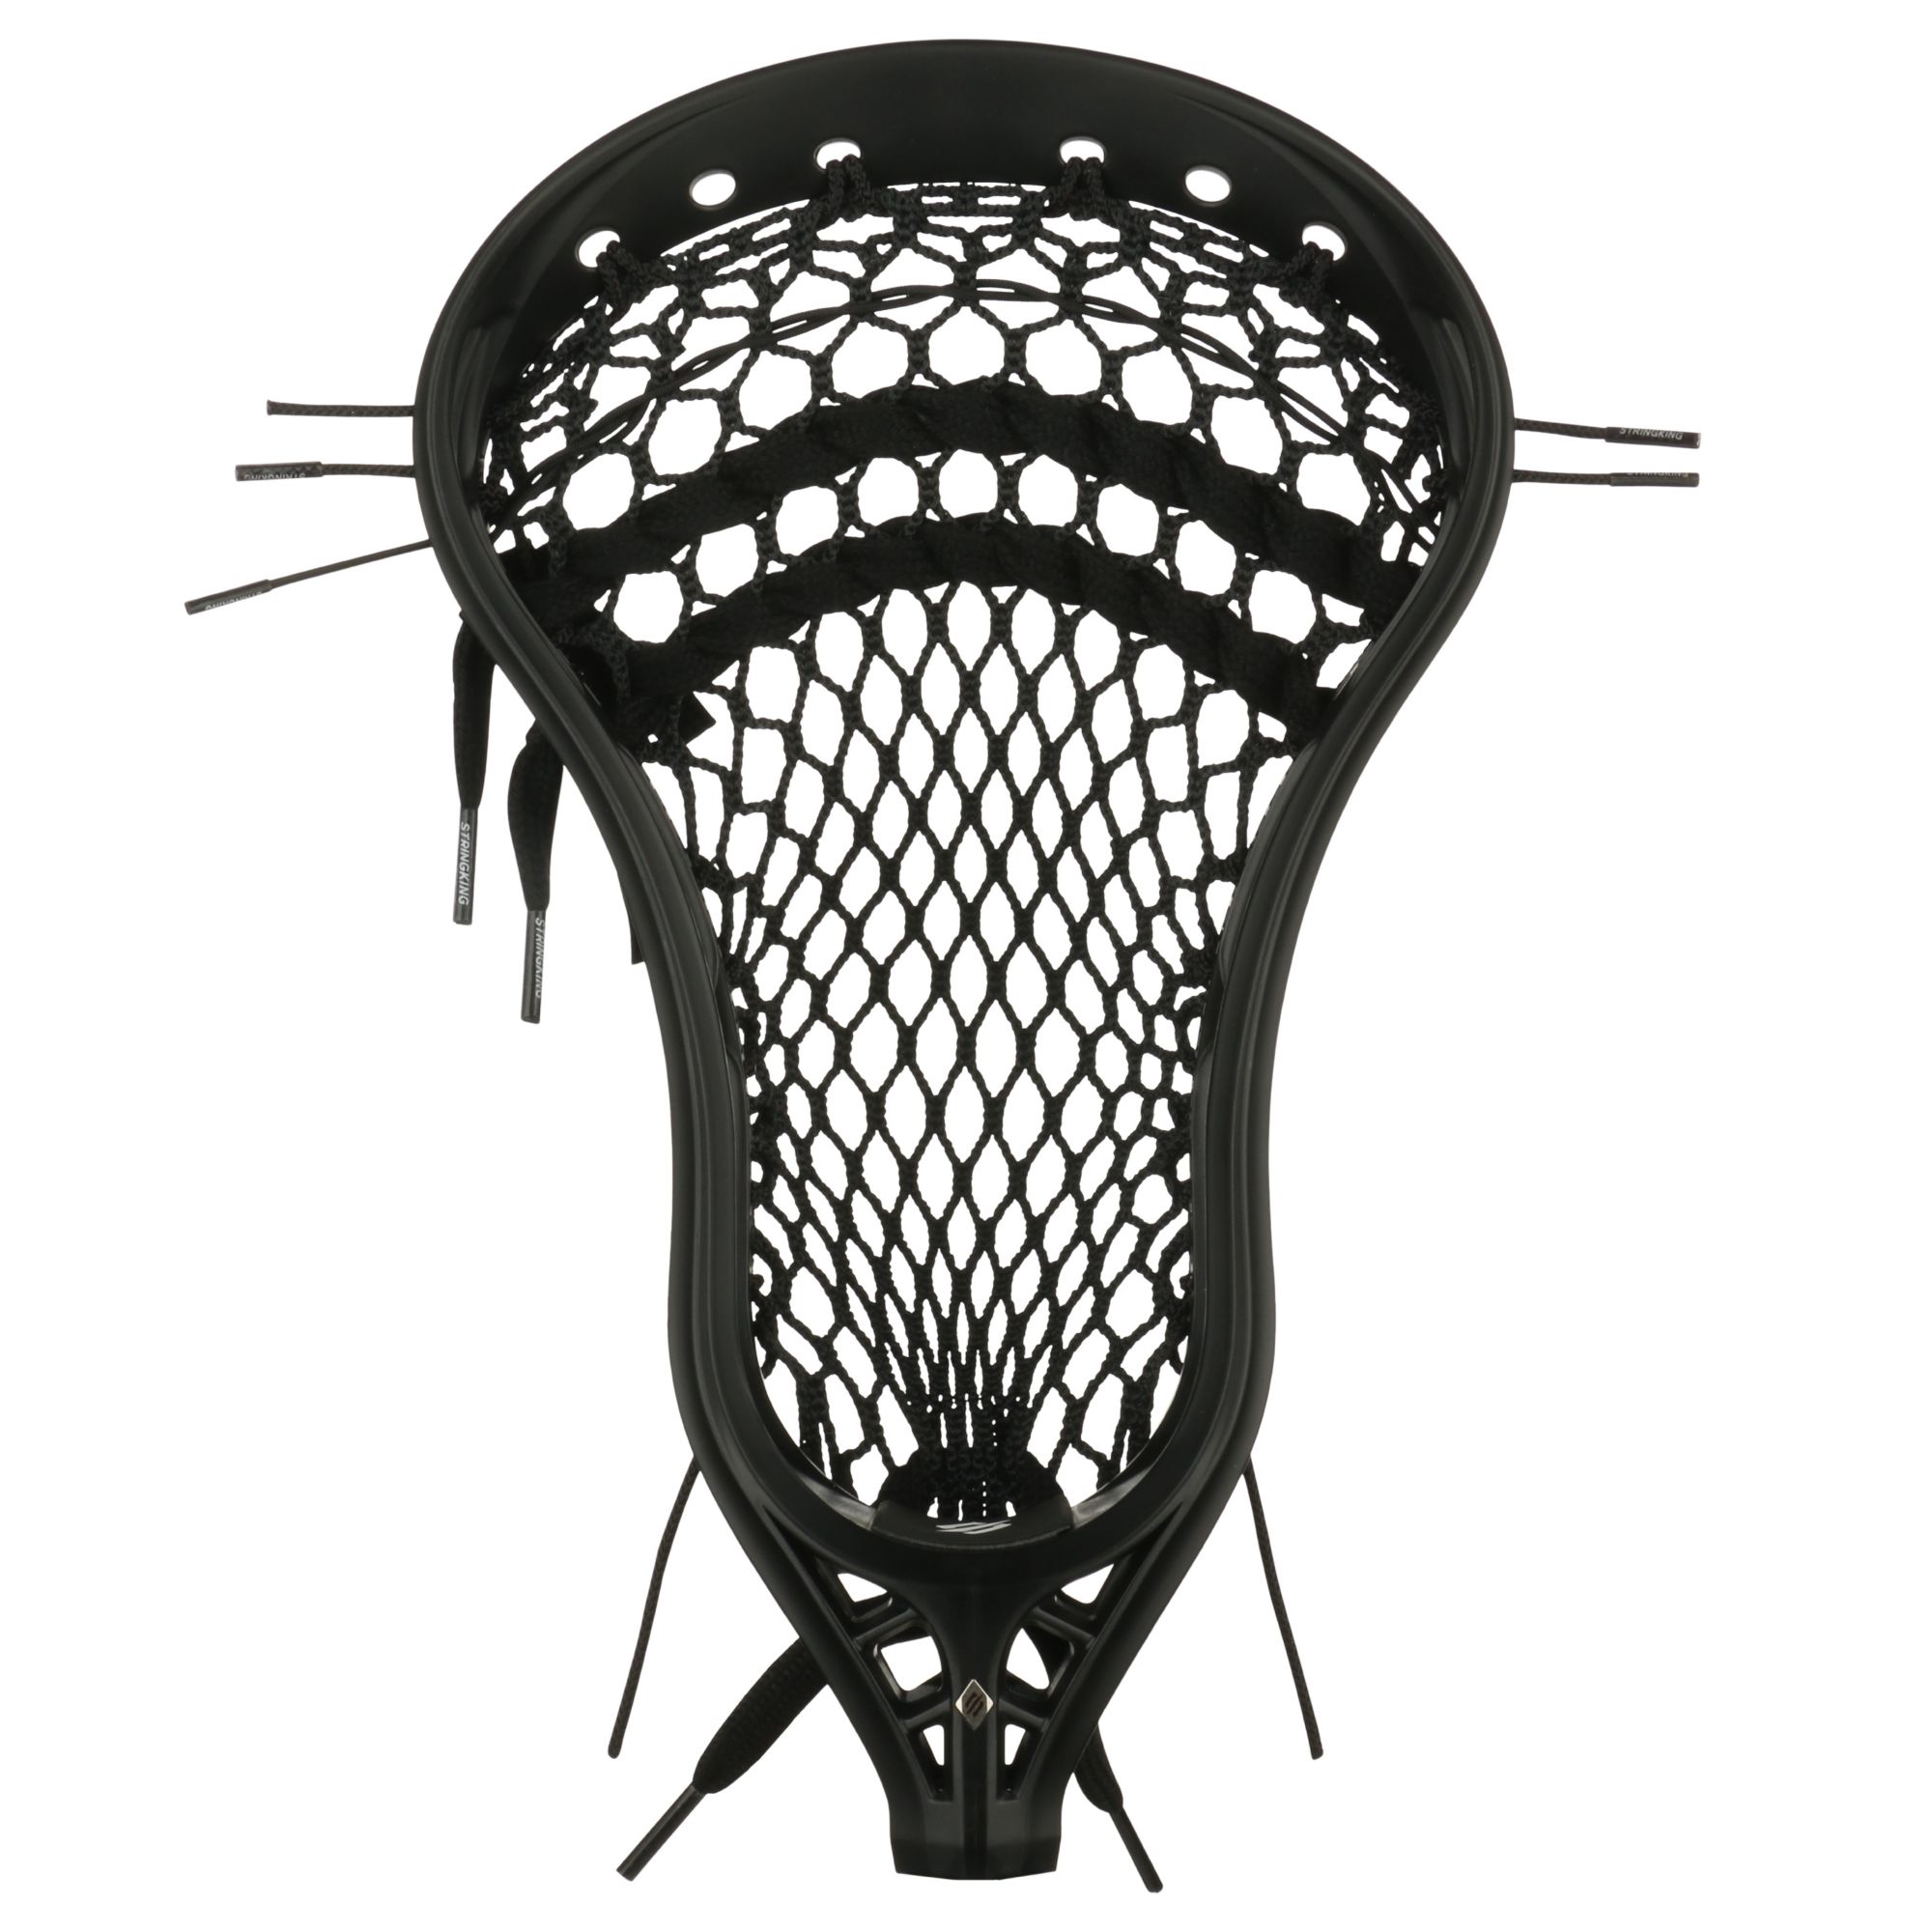 StringKing Mark 2A Lacrosse Head with 5S Mesh